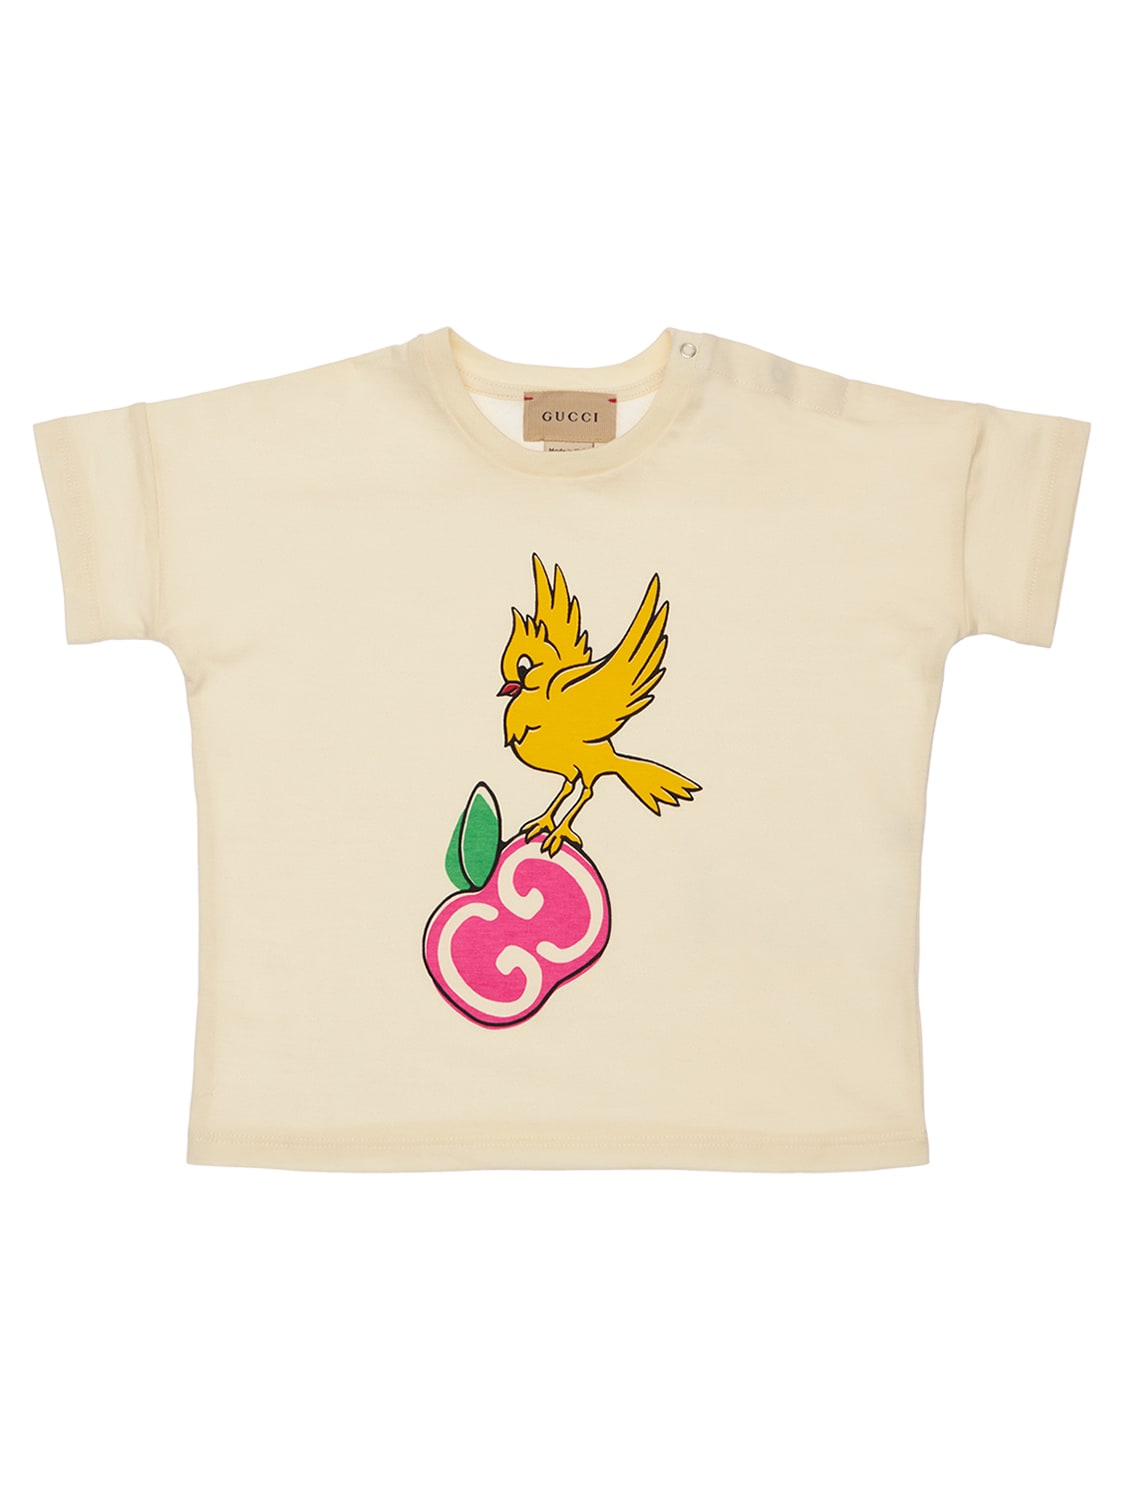 Gucci Kids' Printed Cotton Jersey T-shirt In Multicolor